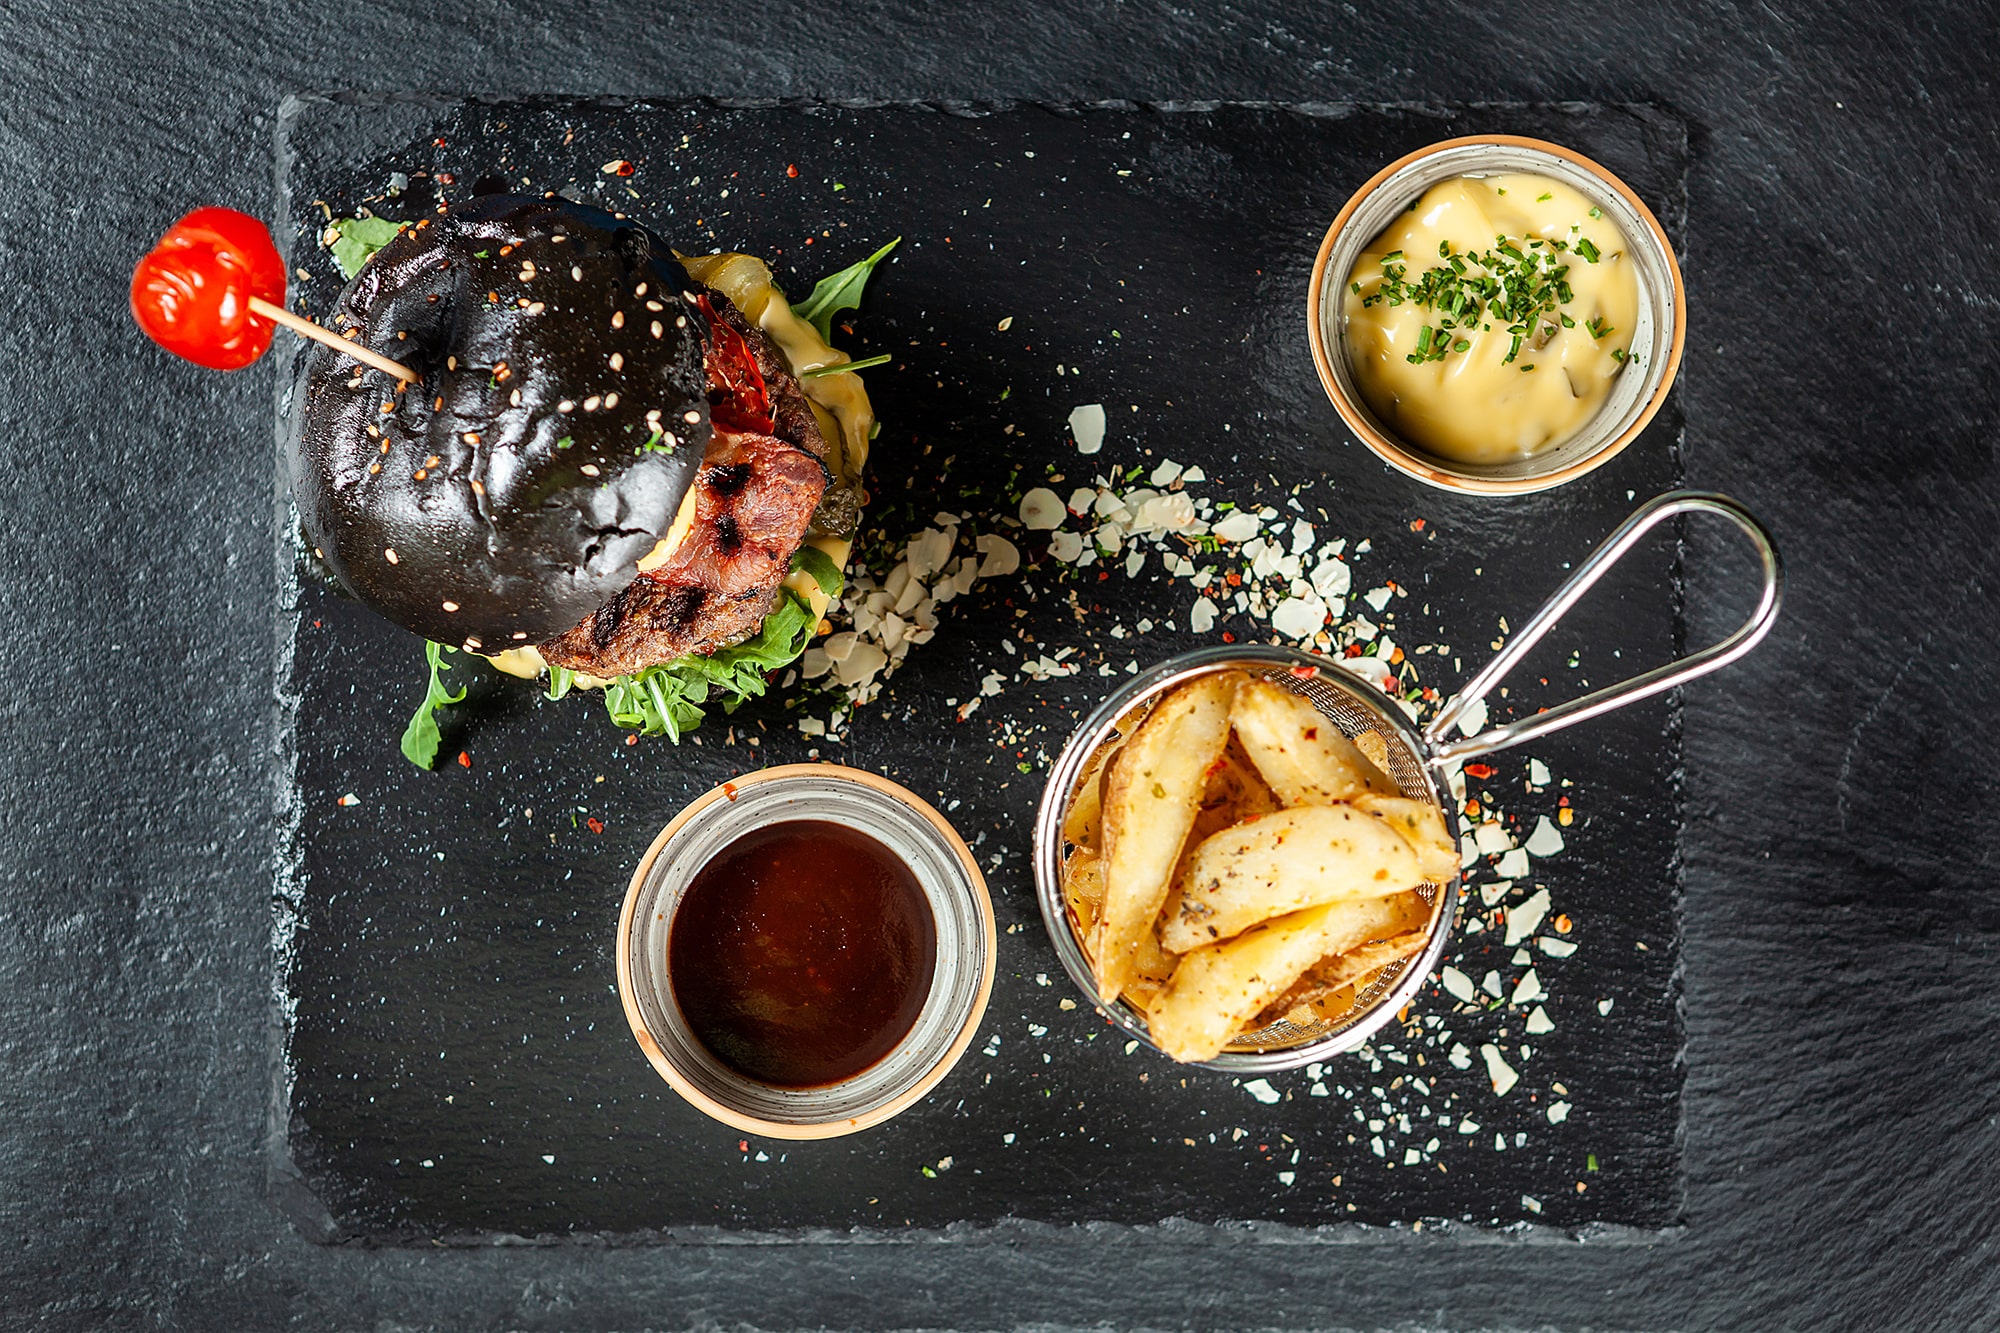 burger-and-friench-fries-on-black-stone-table-chee-E7PRL84-min